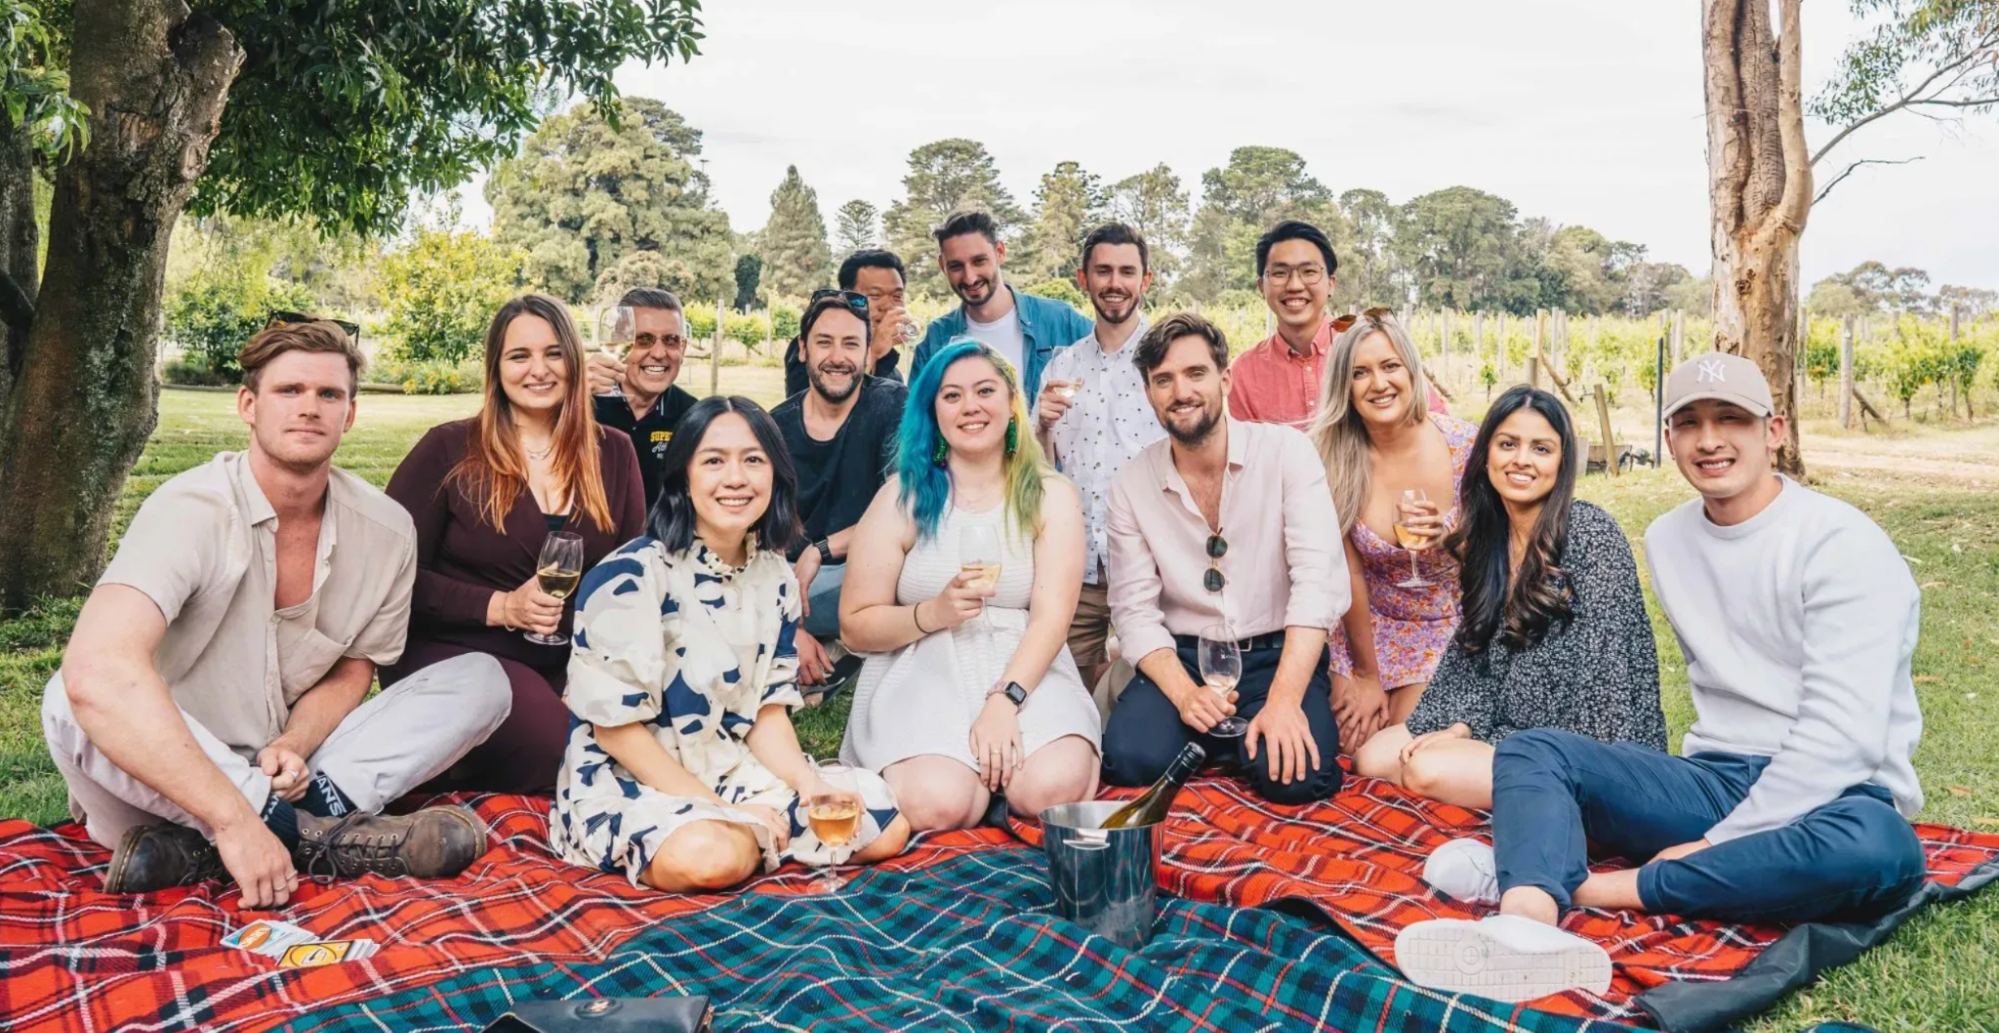 The Exo Digital team poses for a photo, sitting on picnic rugs at a vineyard.